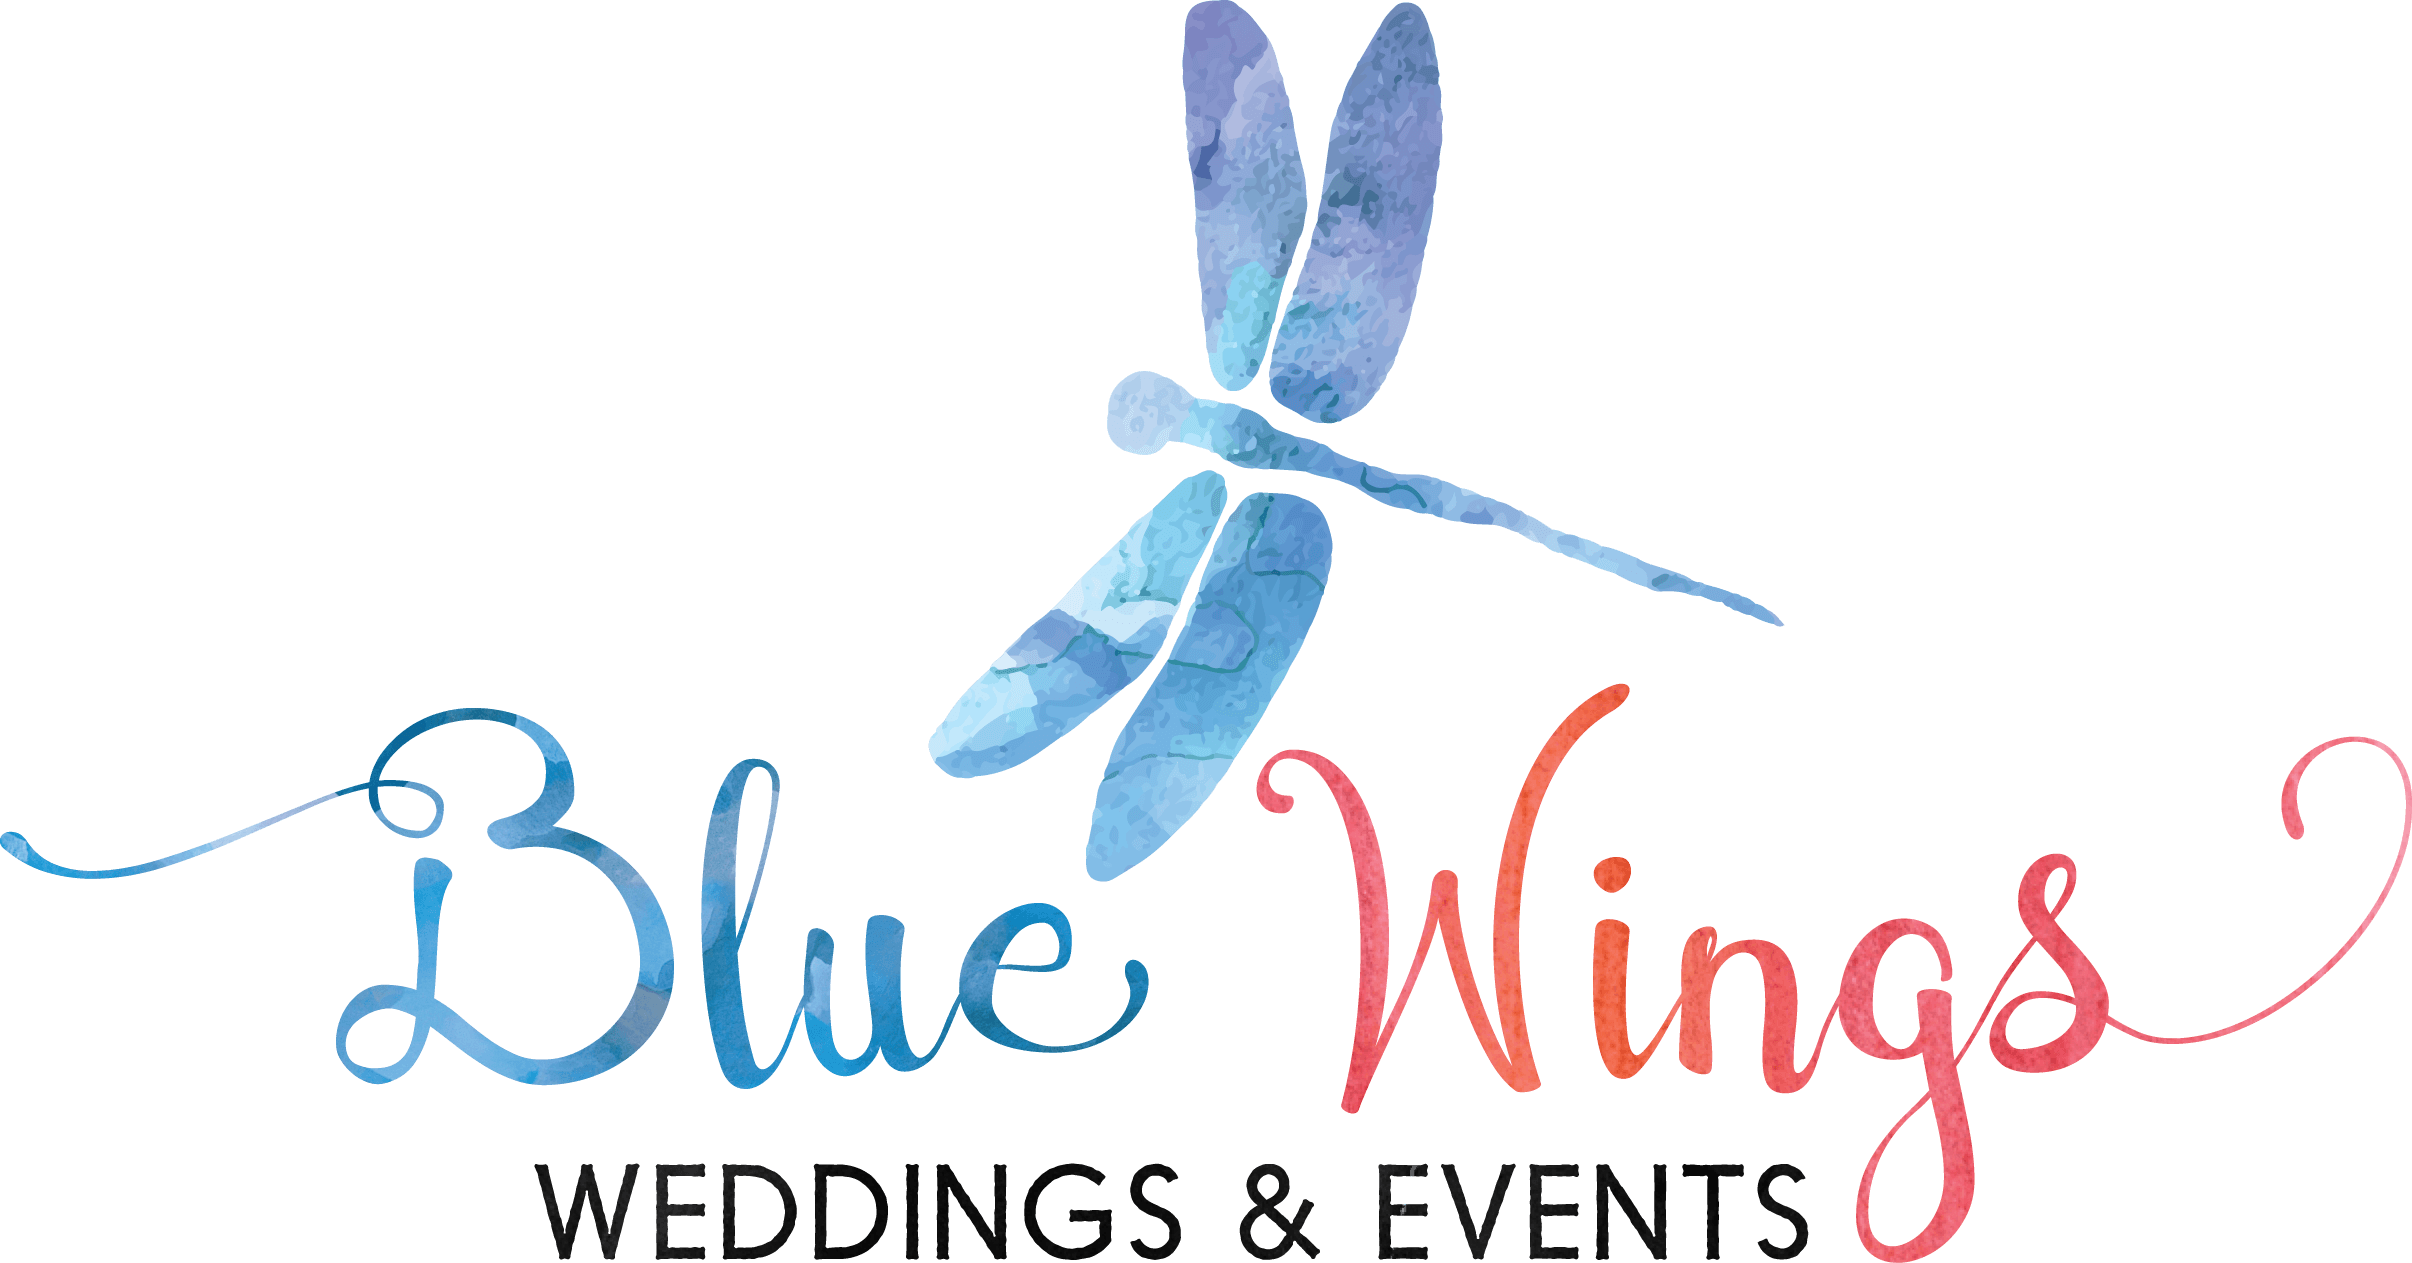 Blue Wings Logo - Blue Wings Events Name & Logo Planner, Event Planner